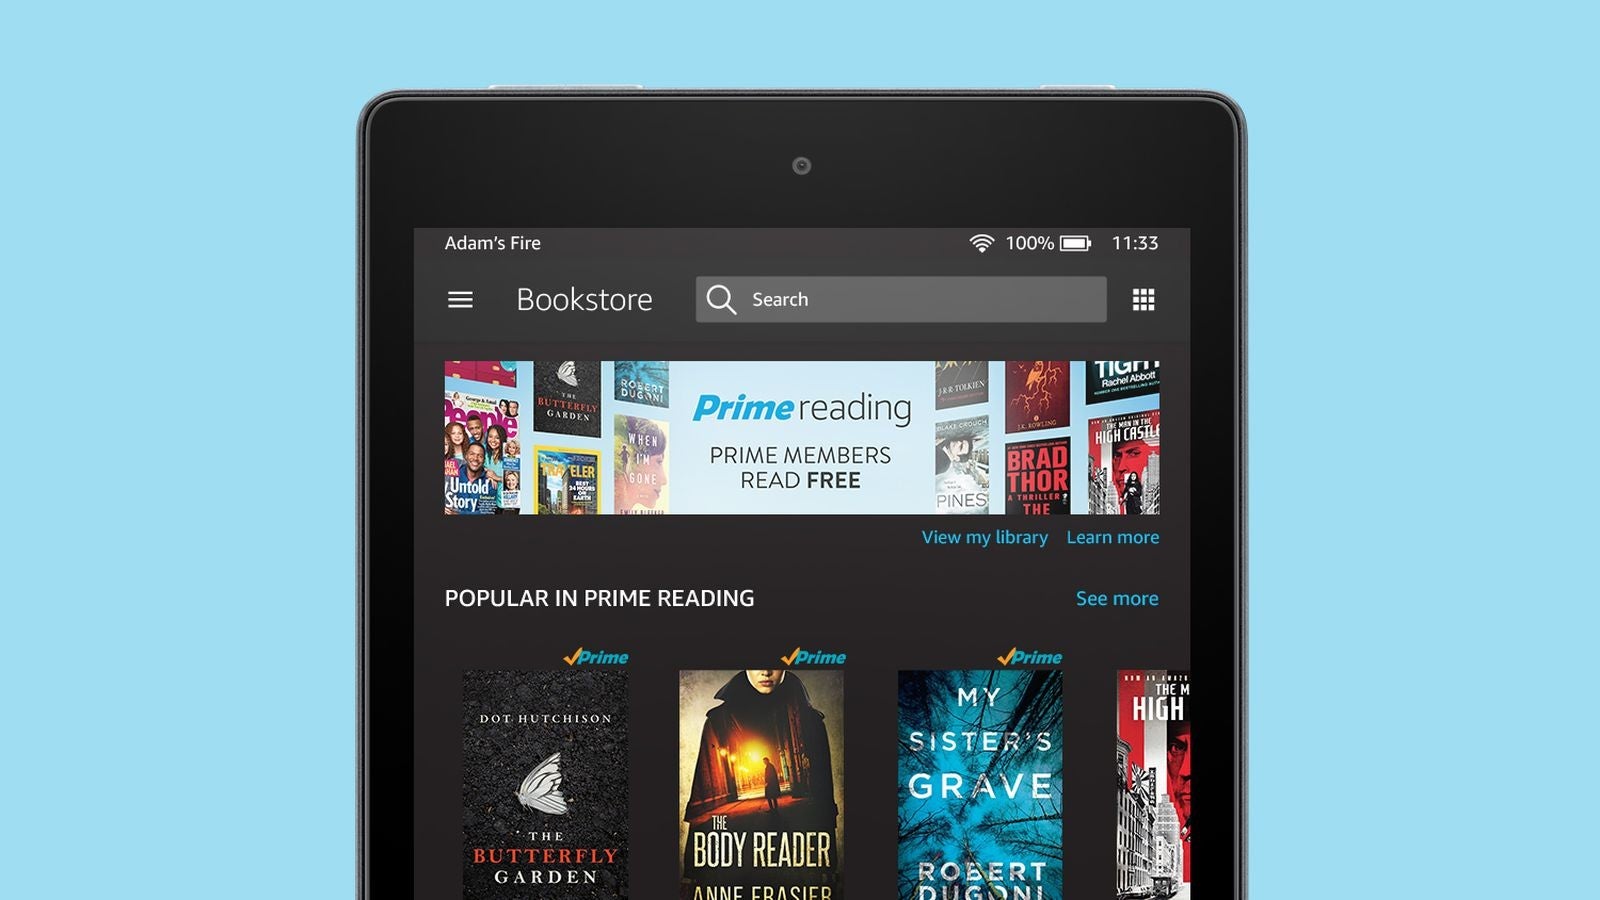 Amazon Prime members now have access to free books, magazines, and comics